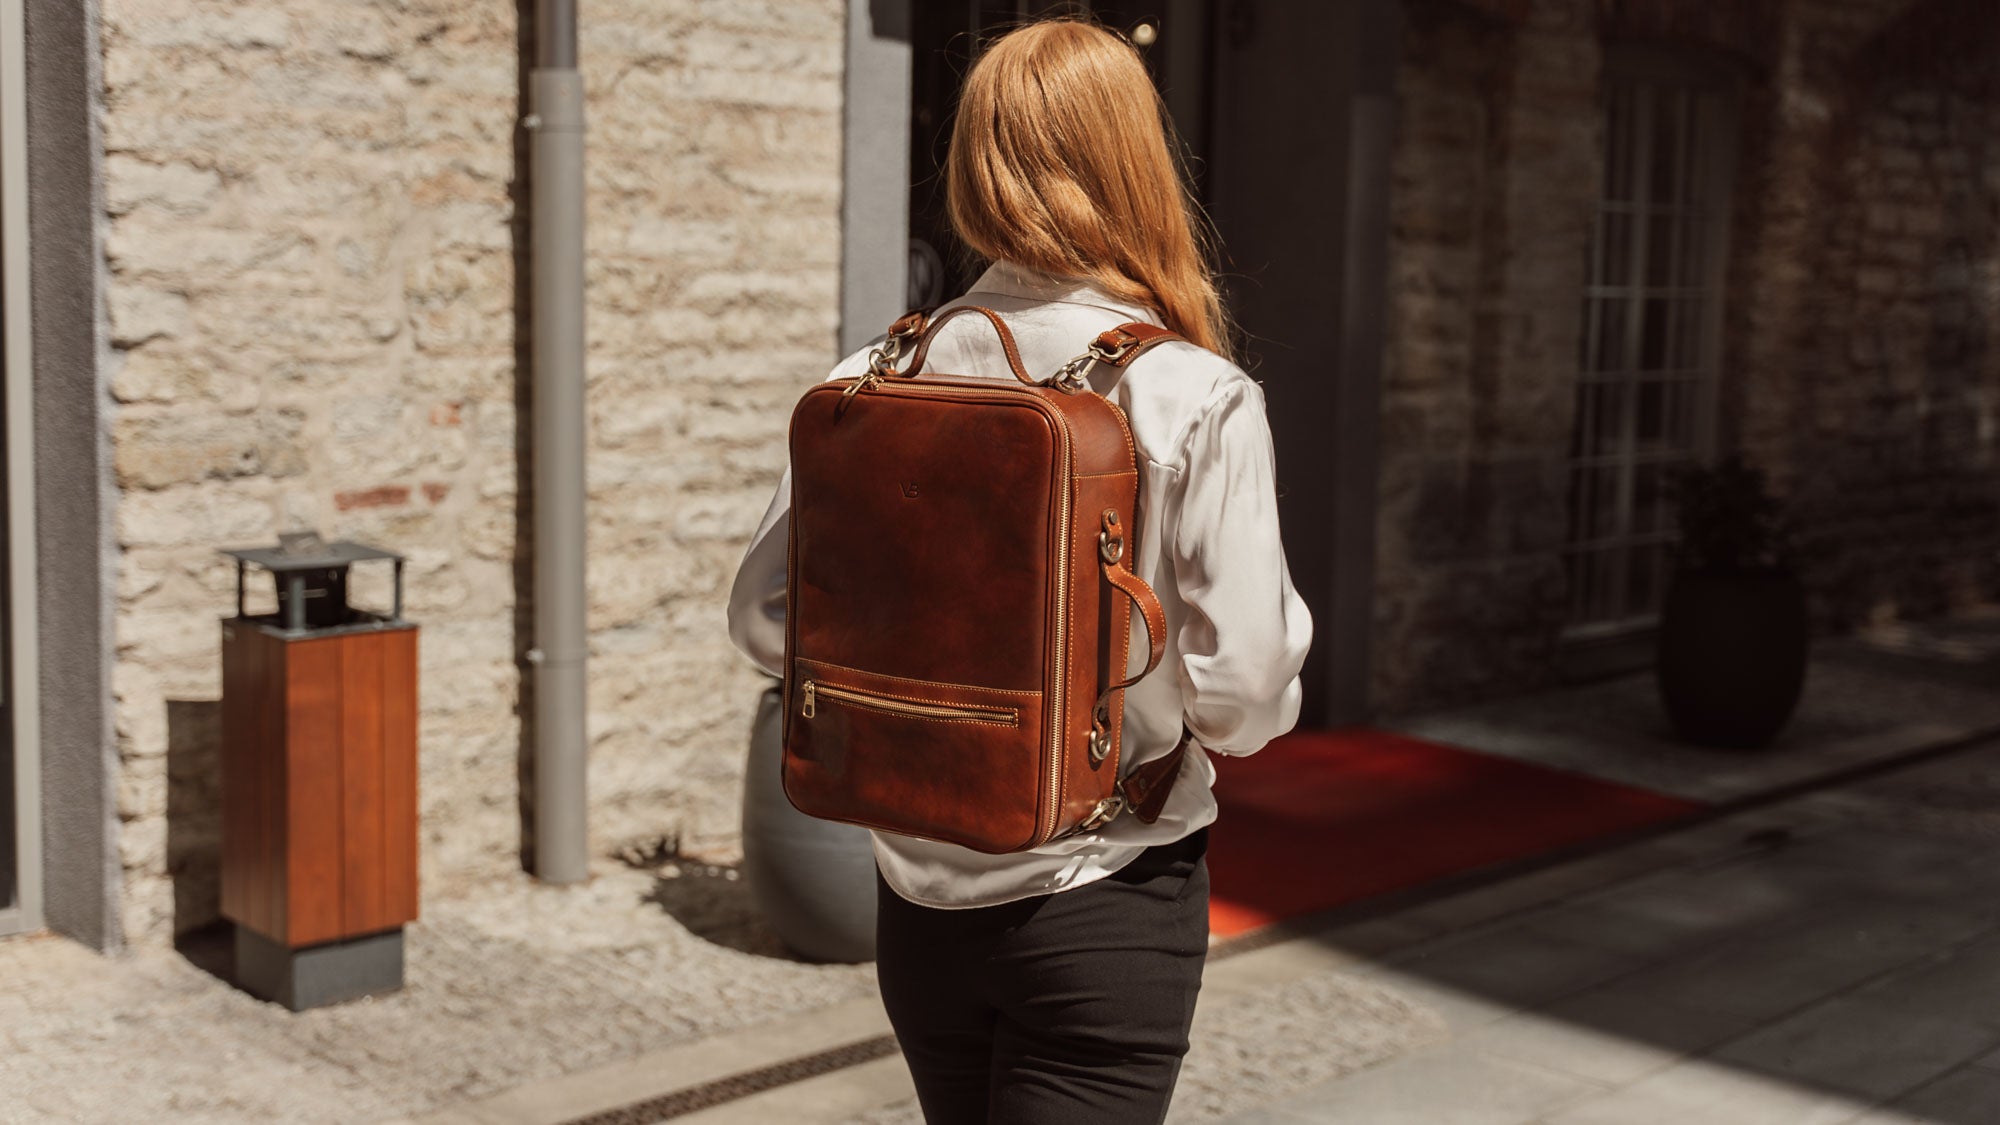 Leather Laptop Backpack for Women in Brown, Tan, or Black, Convertible ...